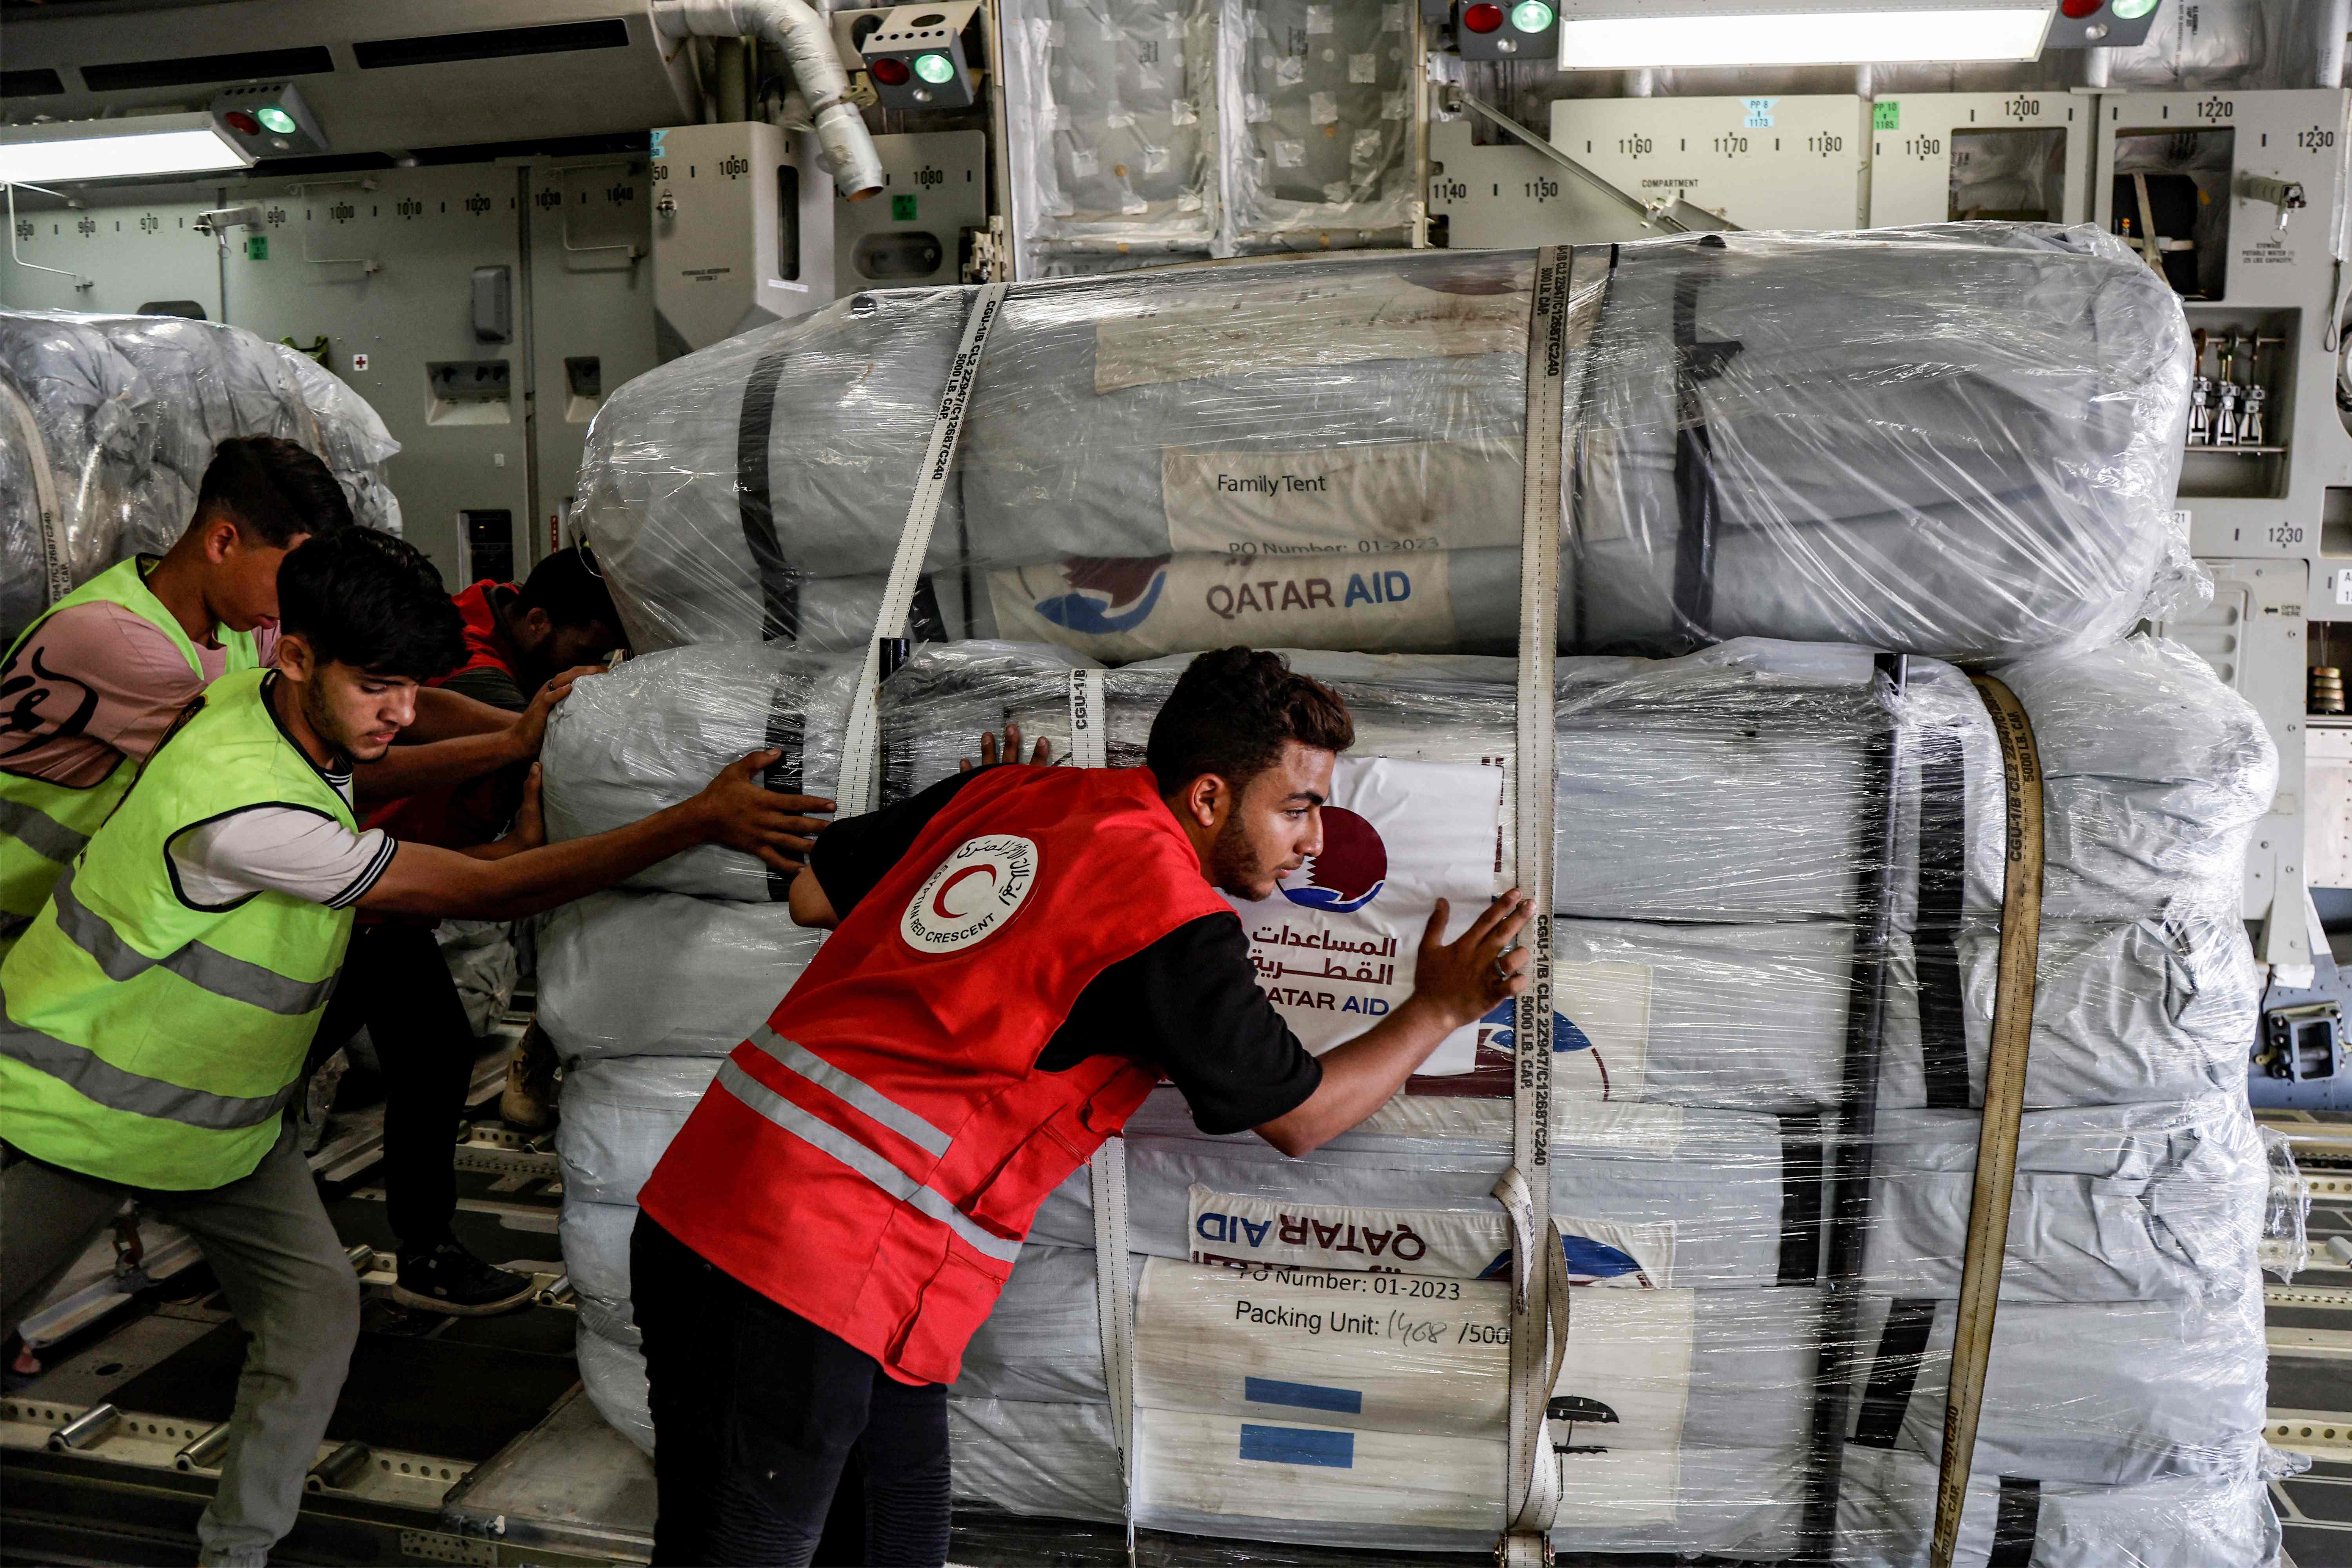 The first US military plane arrived in Egypt to carry 24.5 metric tons of Gaza aid.